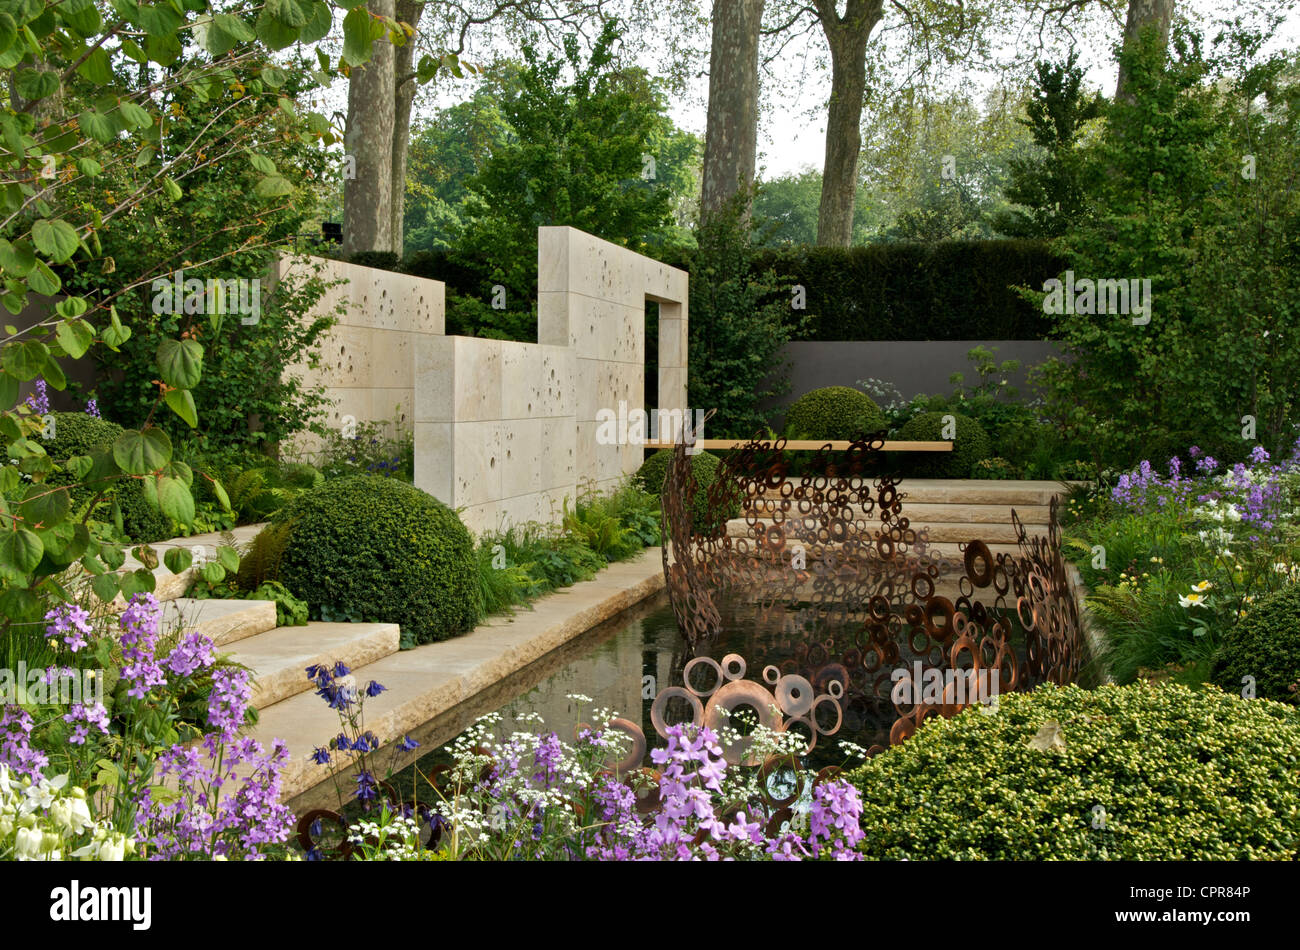 a view of the gold medal winning m&g garden at rhs chelsea flower